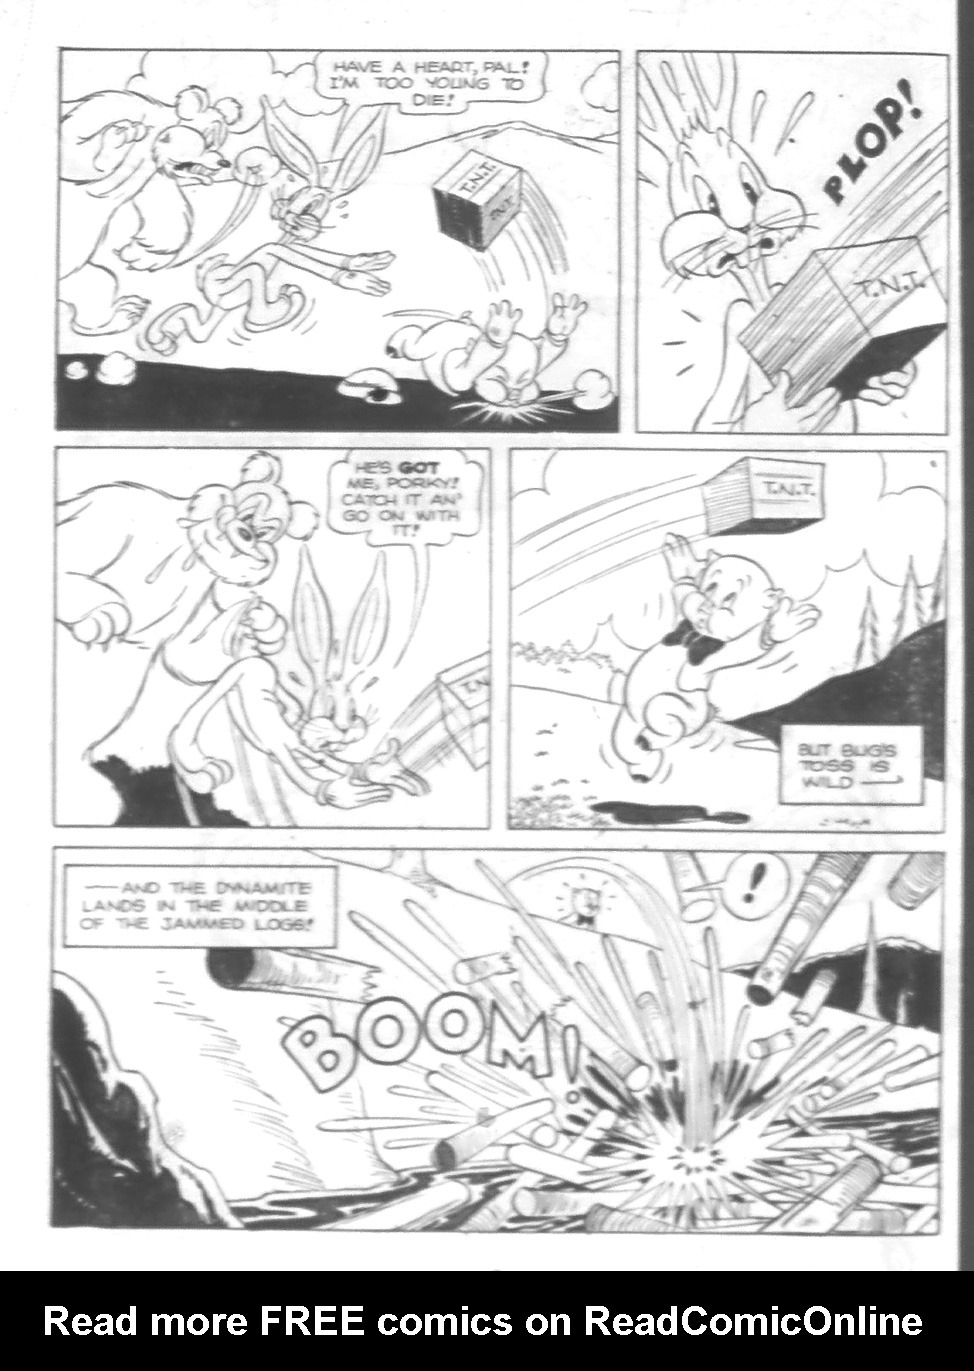 Read online Bugs Bunny comic -  Issue #8 - 20